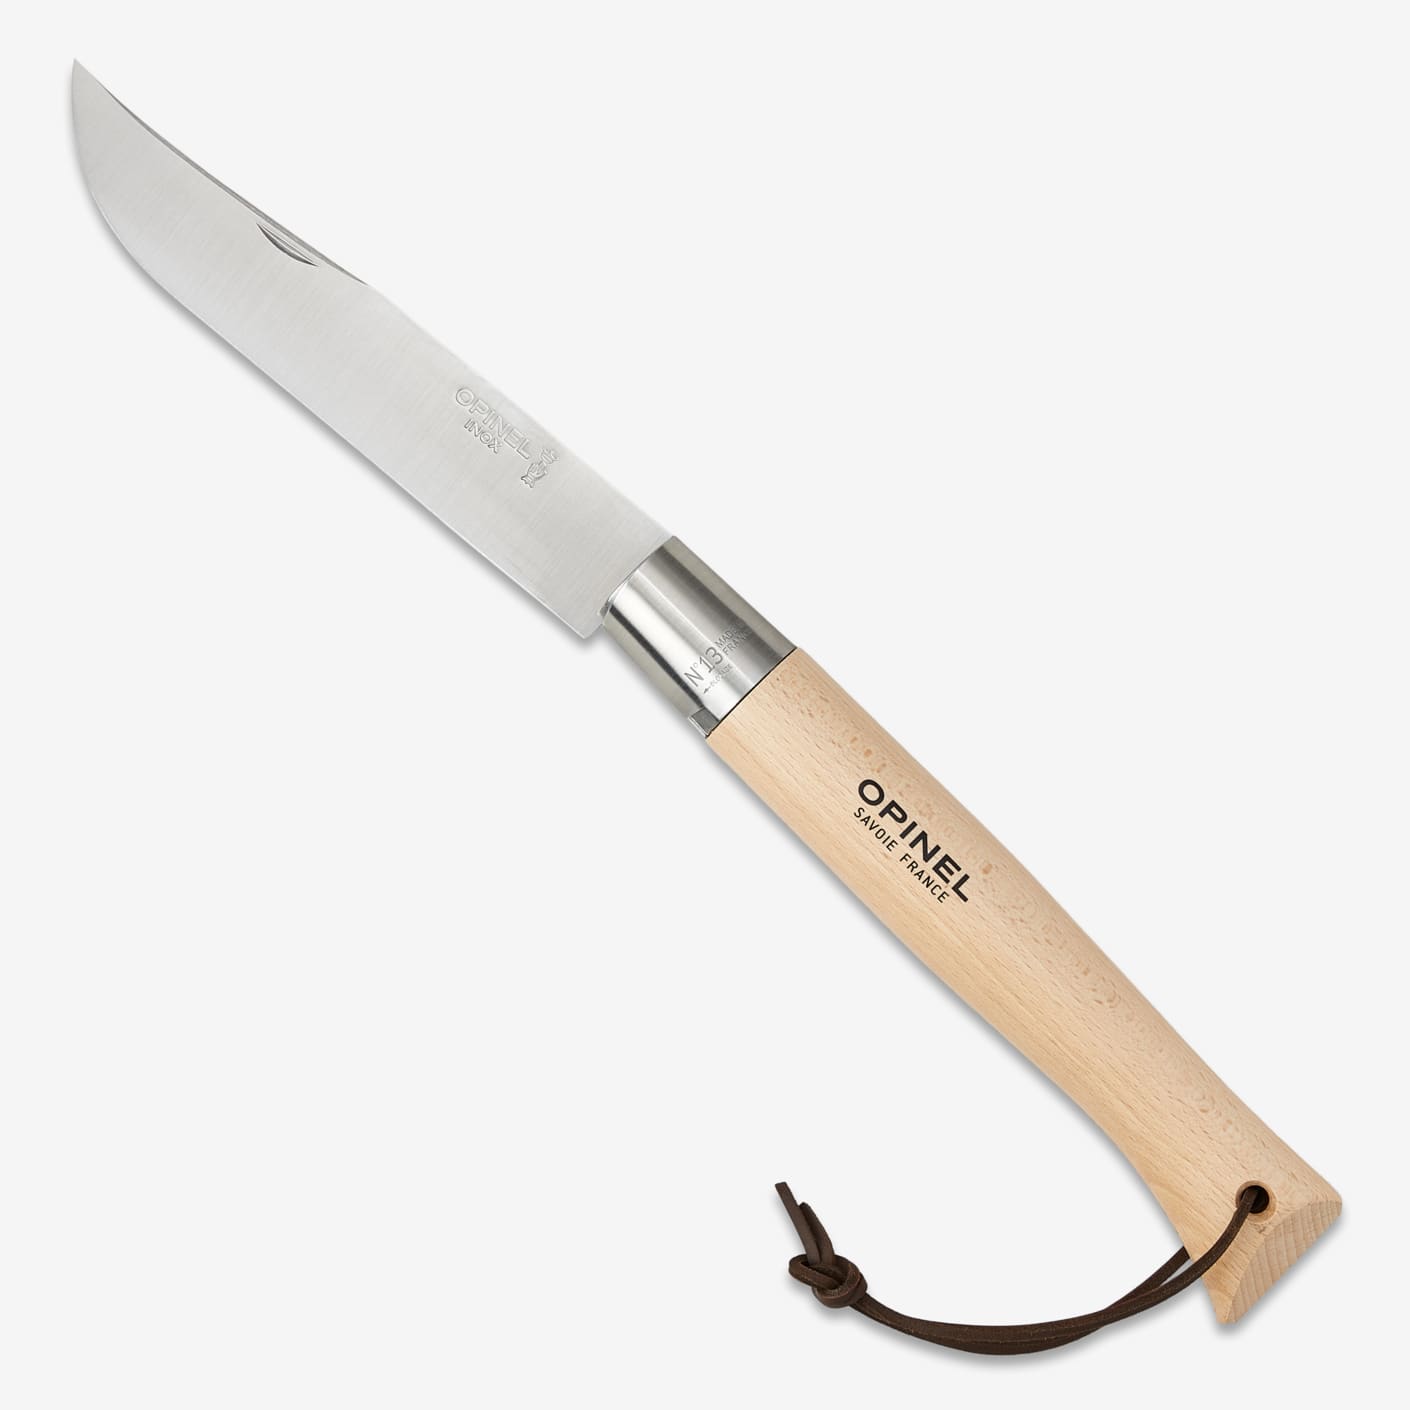 OPINEL No 13 GIANT Stainless Steel Folding Knife